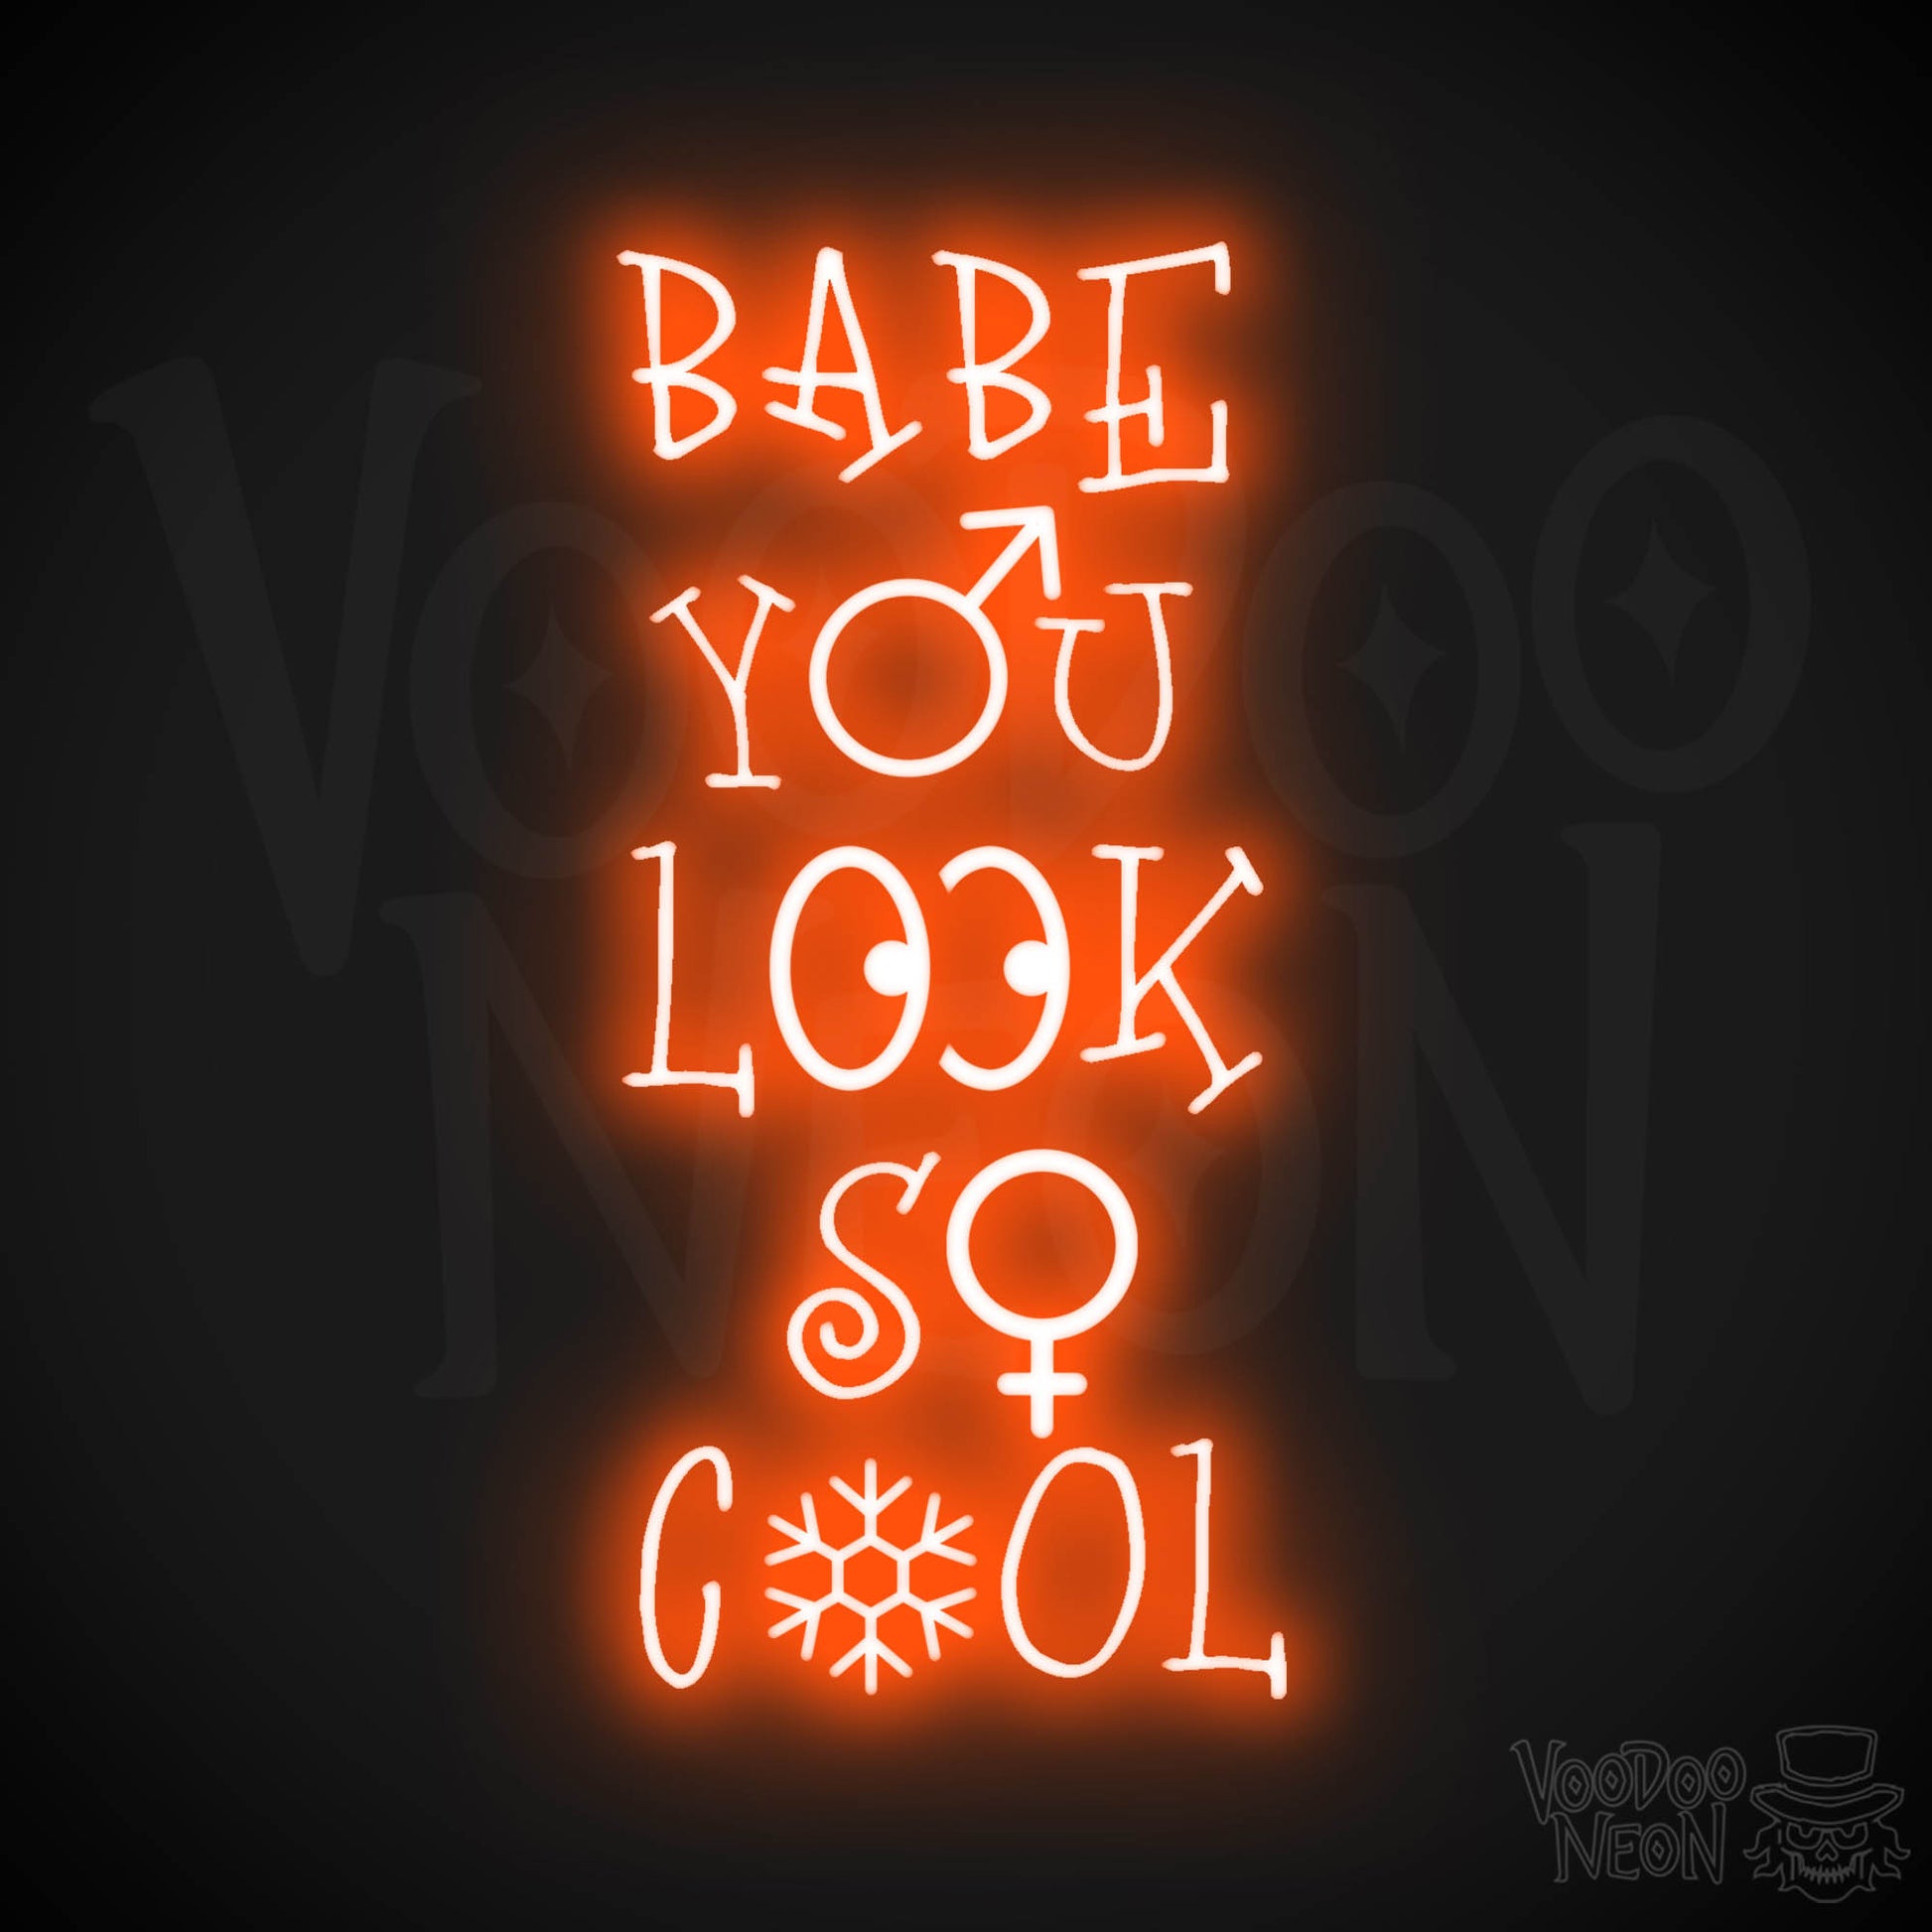 Babe You Look So Cool Neon Sign - LED Wall Art - Color Orange